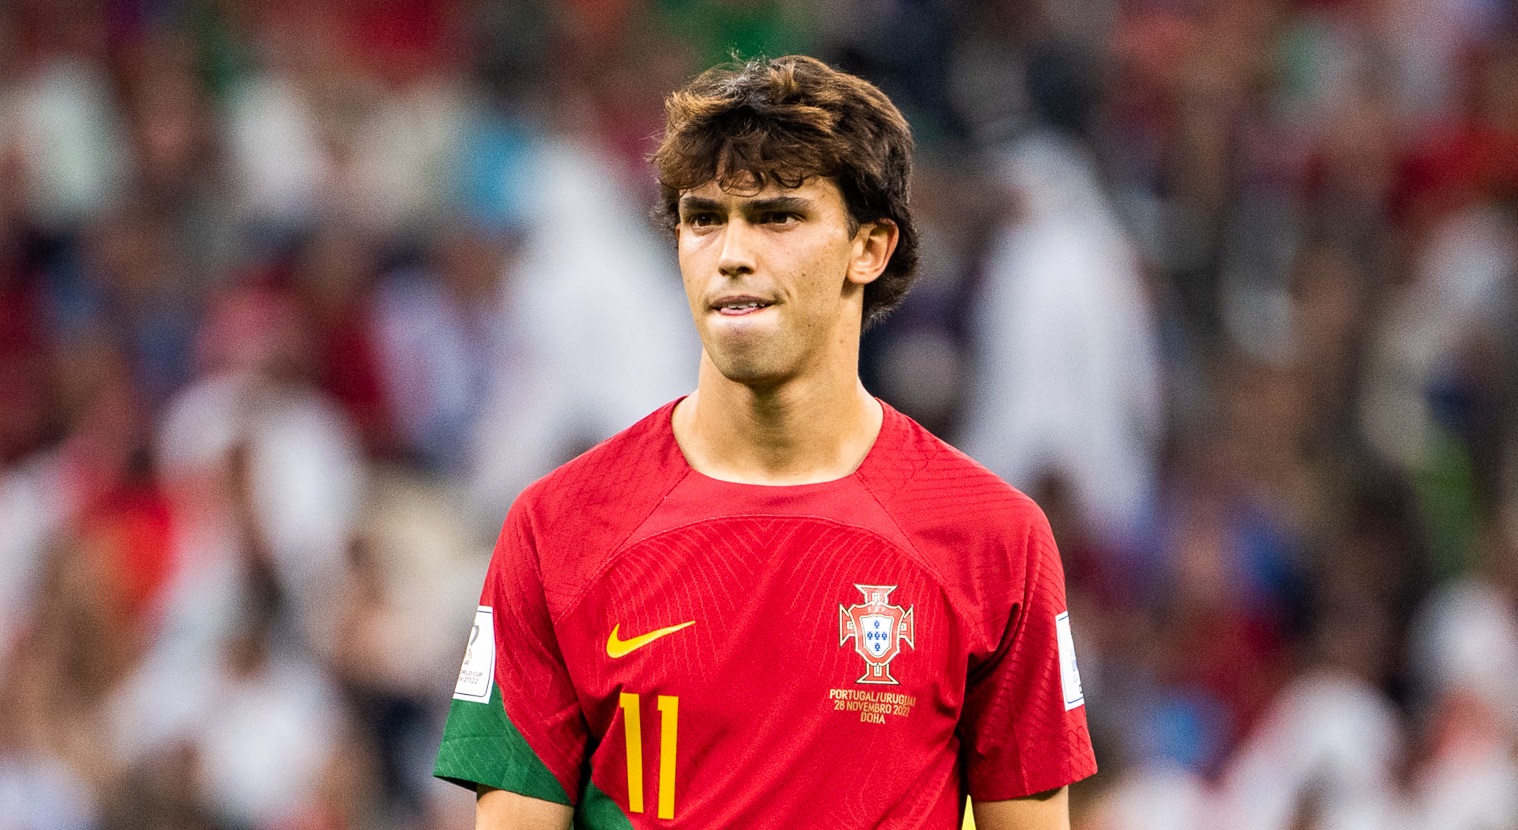 João Félix begins his speech with his arrival at the Blues – foot11.com